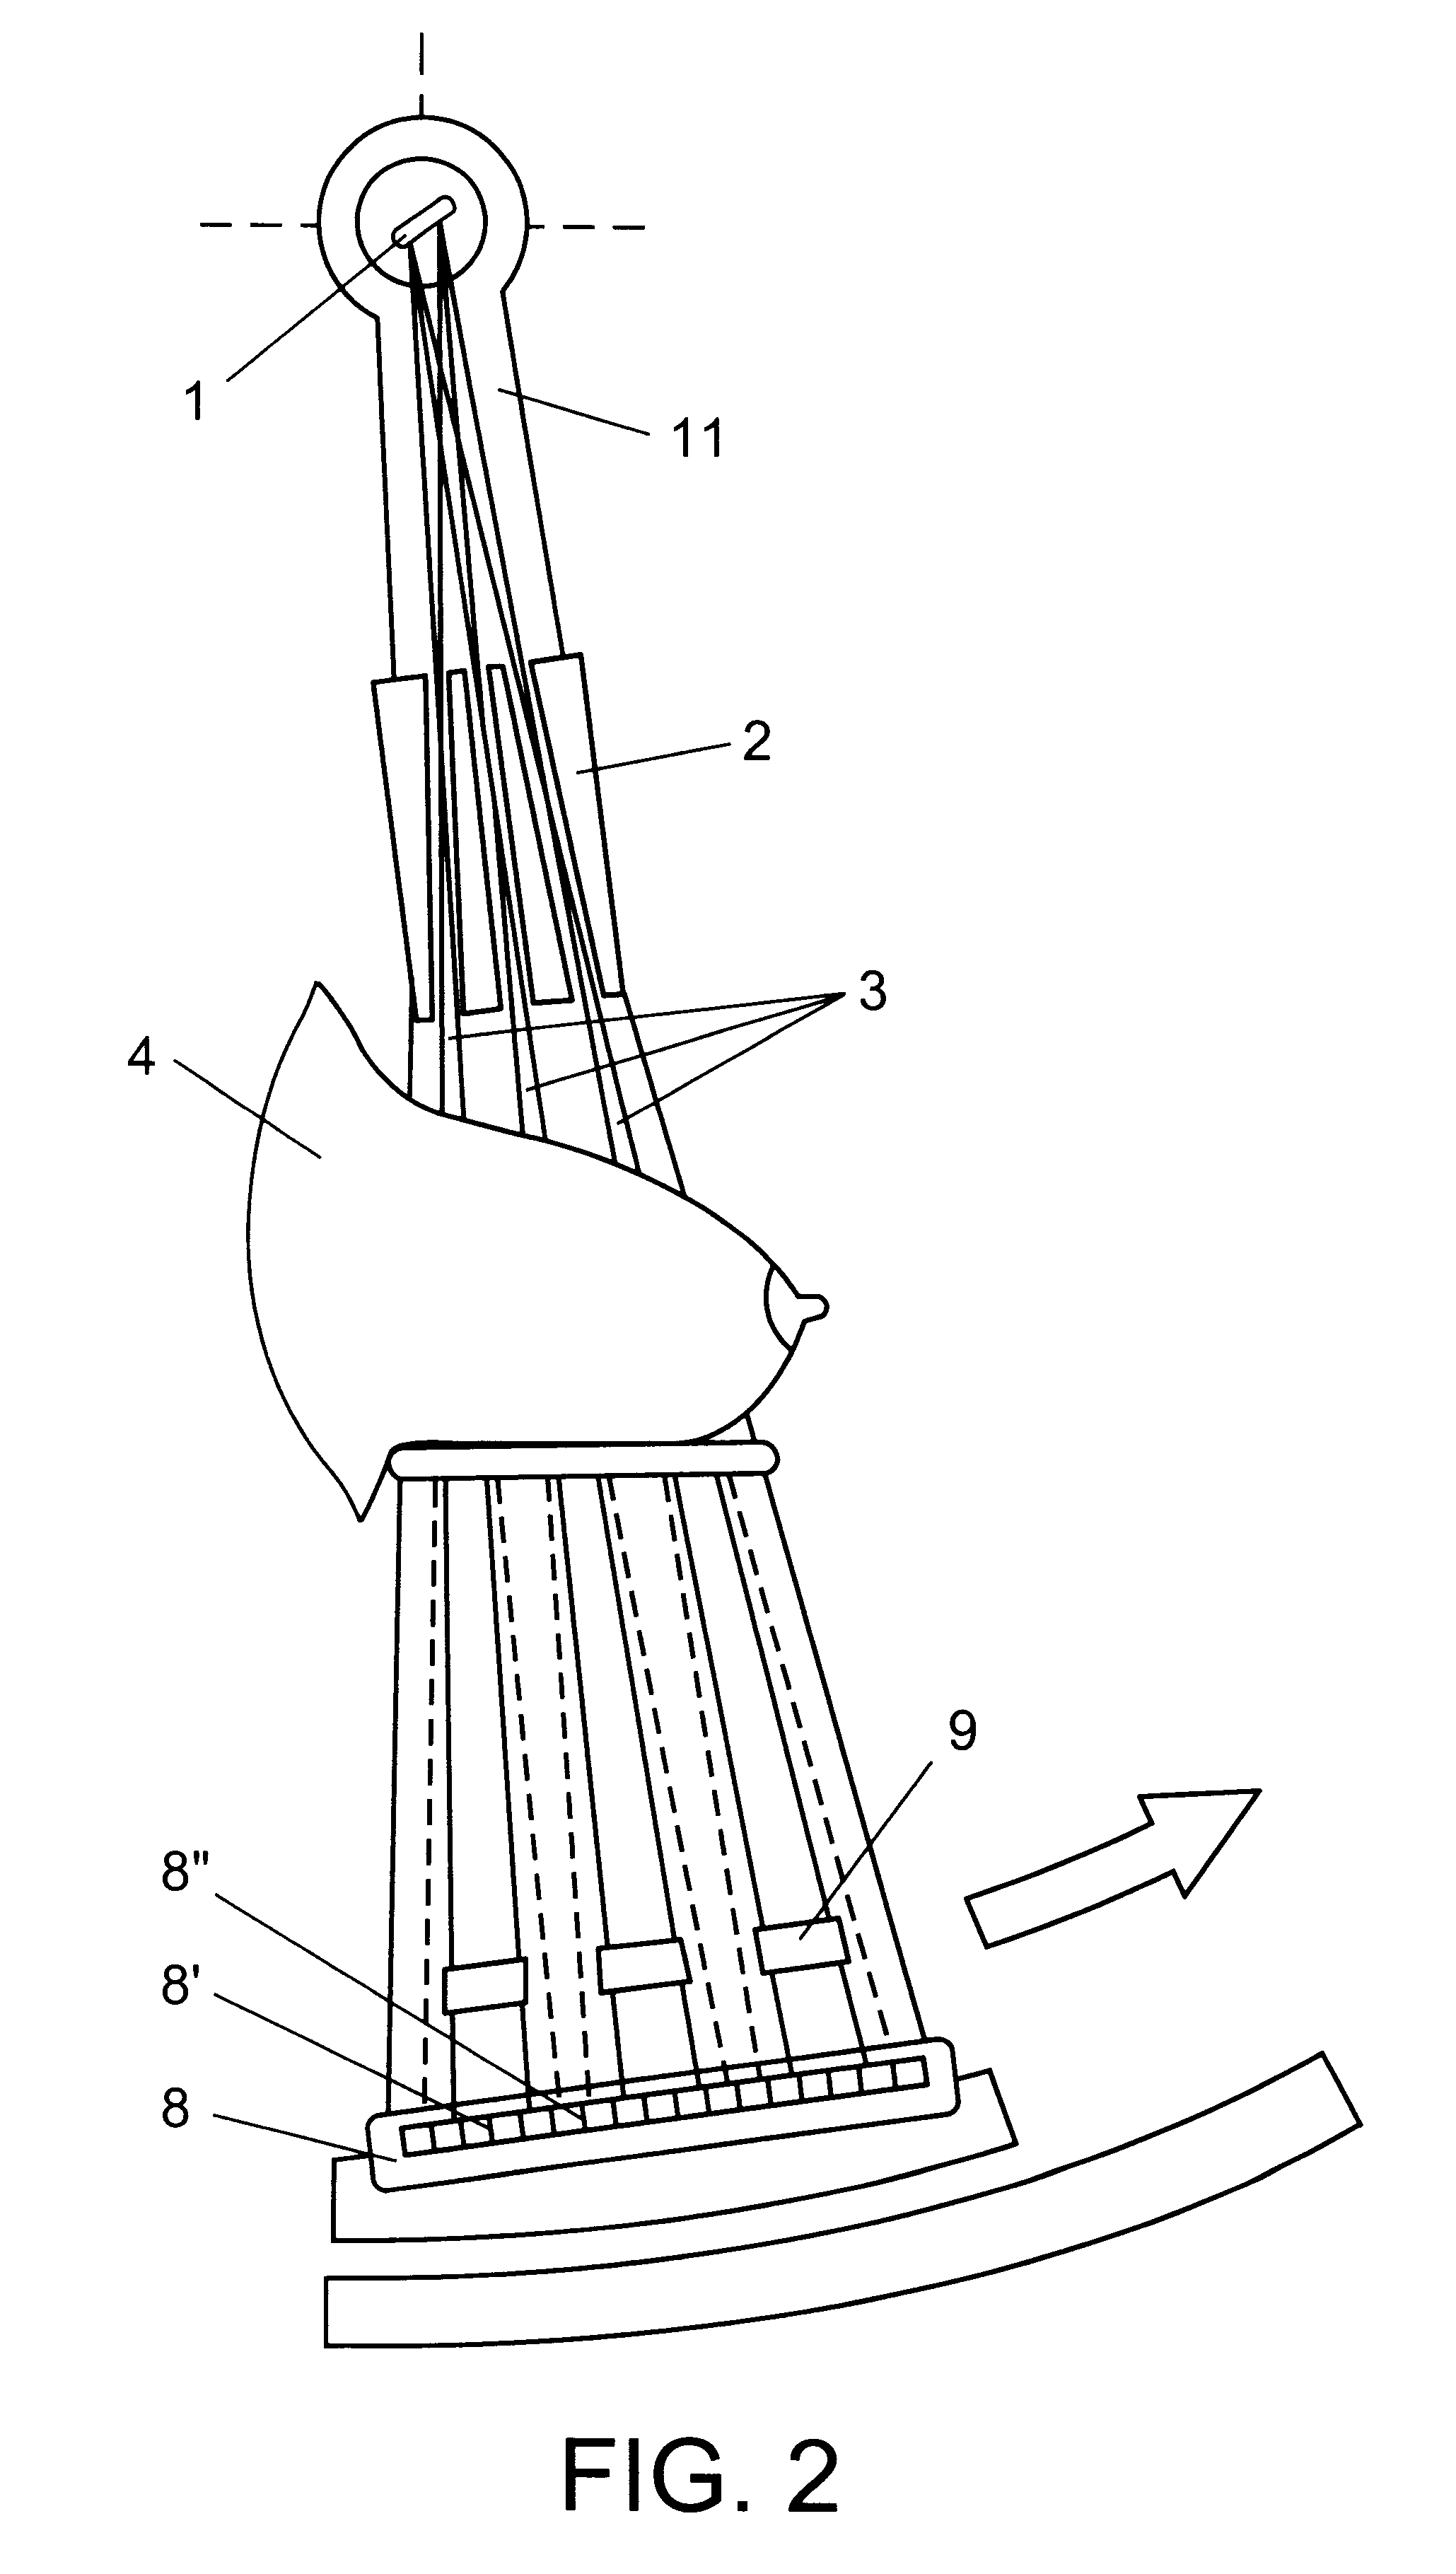 Reduced-angle mammography device and variants